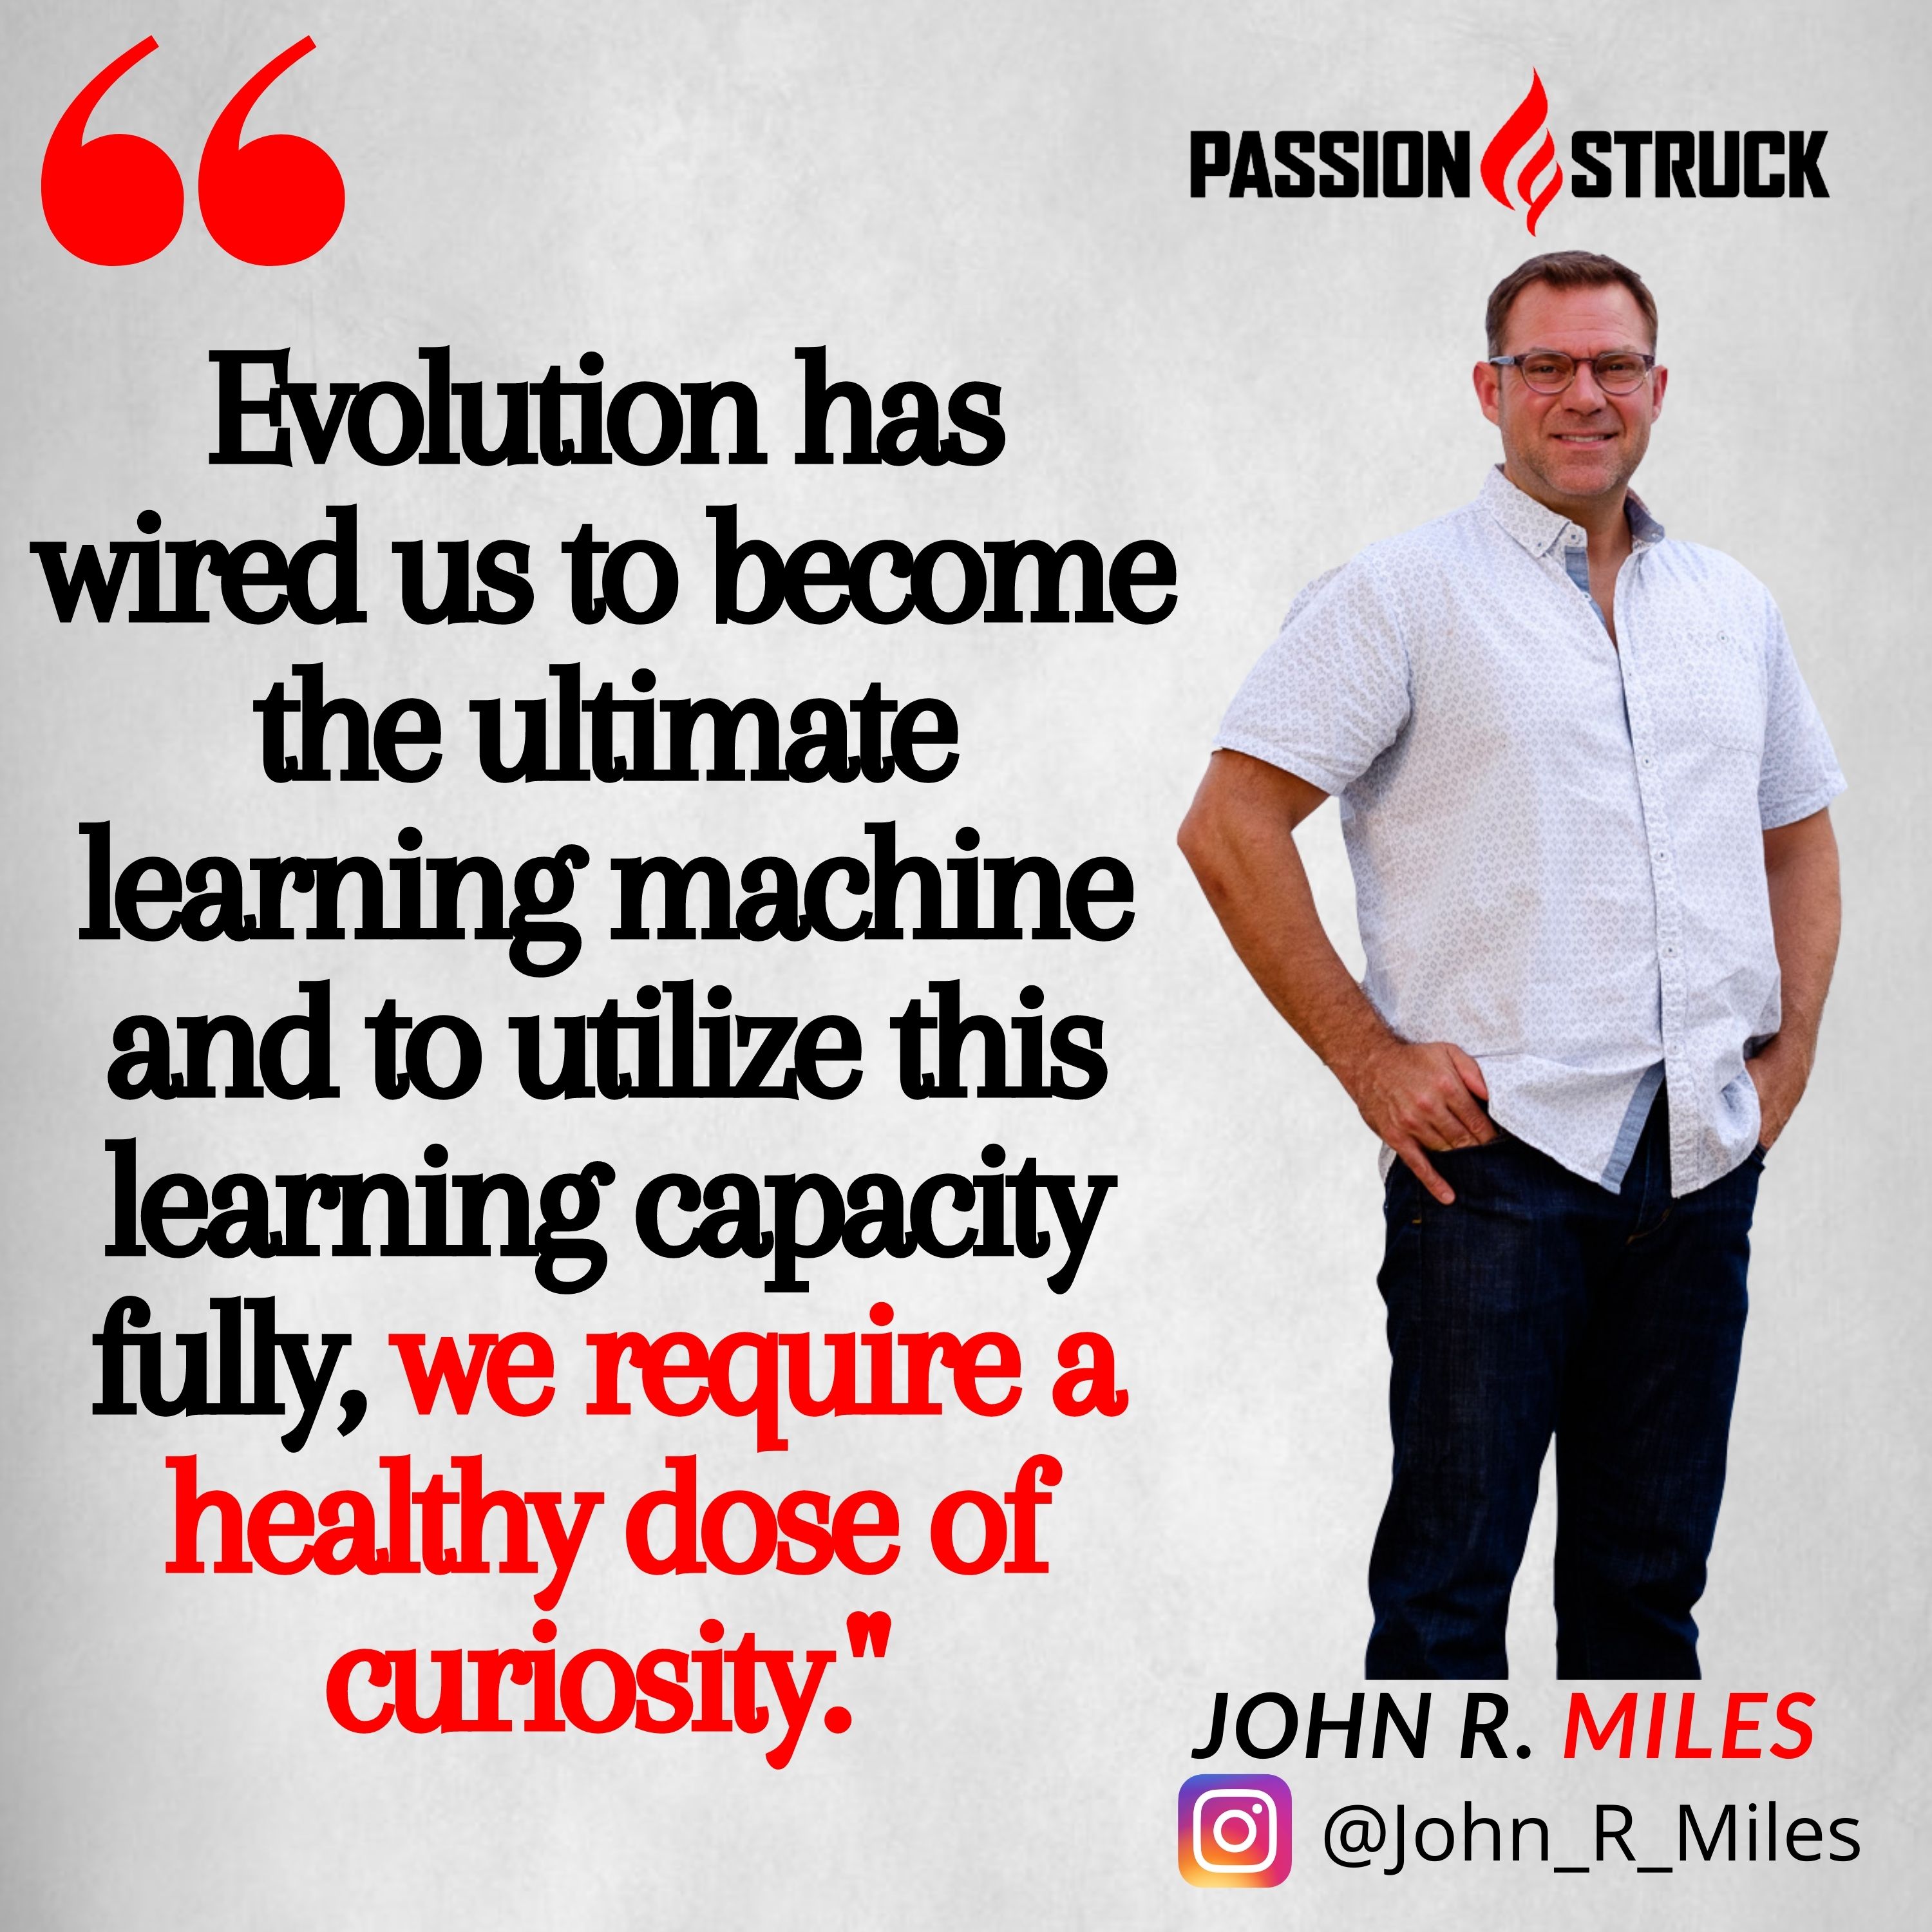 Quote by John R. Miles Evolution has wired us to become the ultimate learning machine and to utilize this learning capacity fully, we require a healthy dose of curiosity